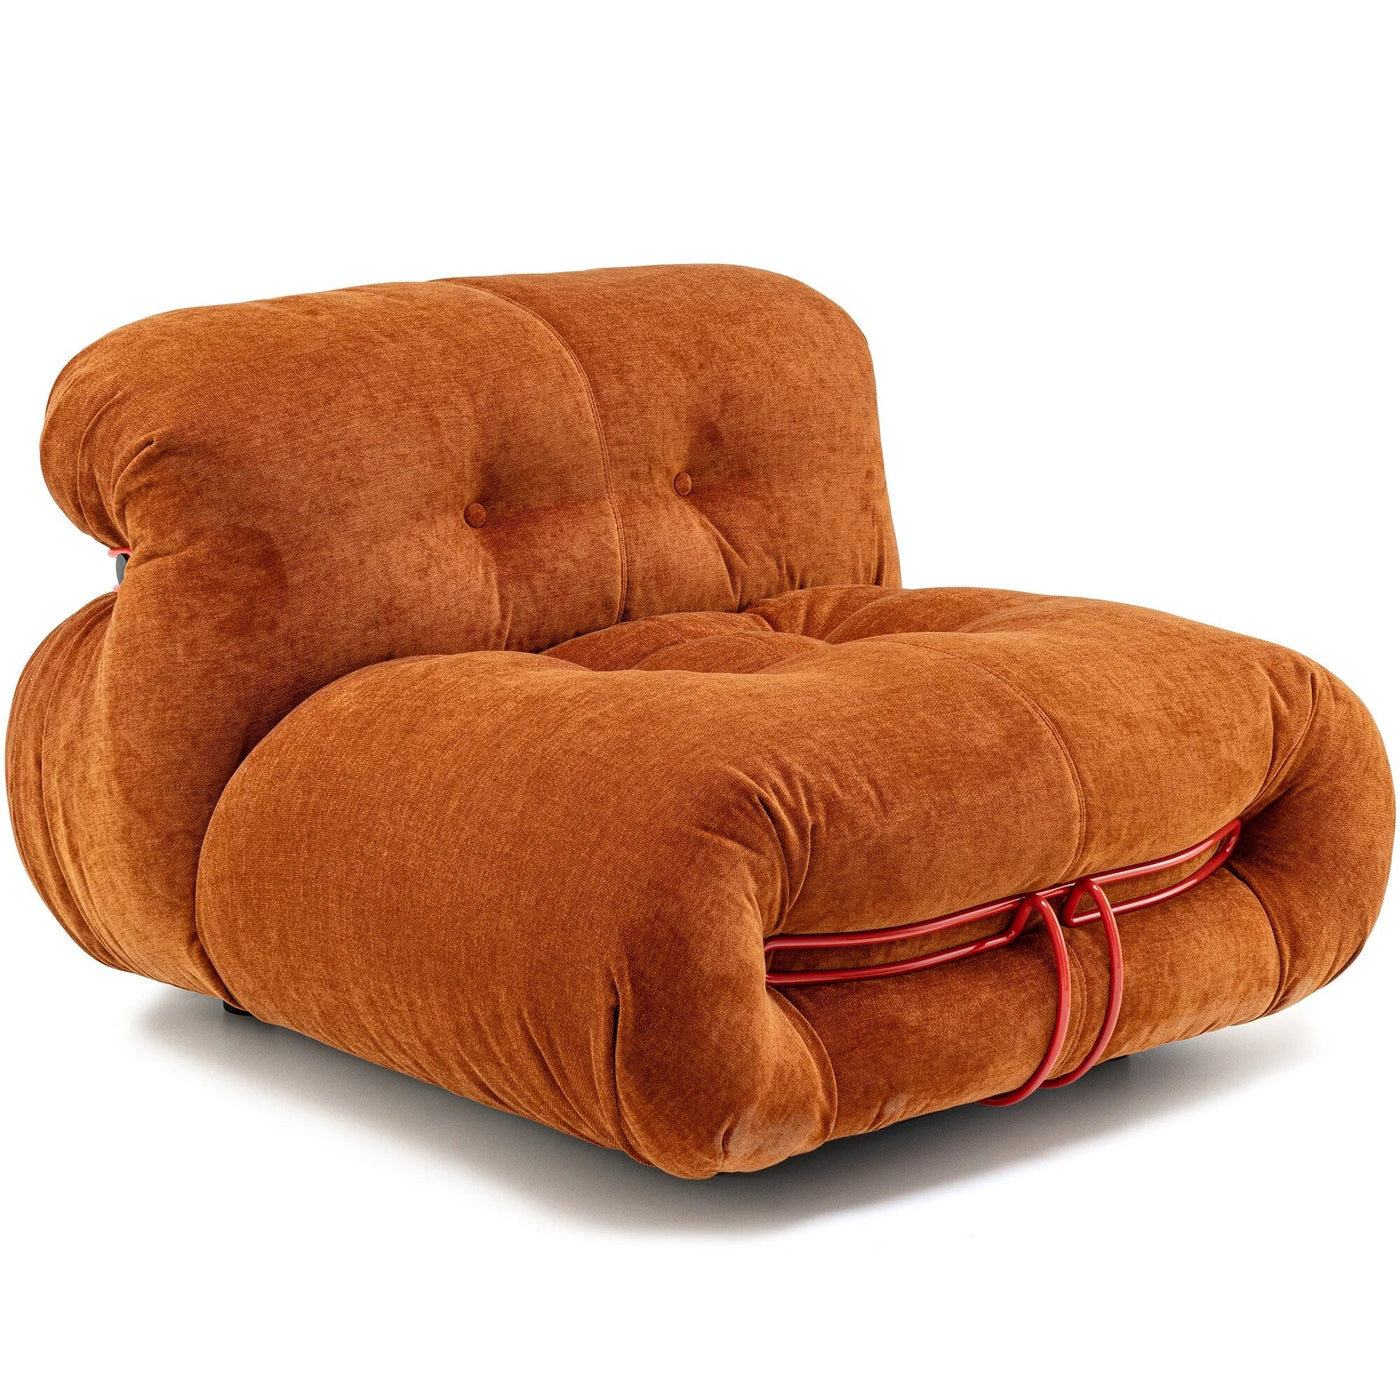 Homio Decor Living Room Teddy Brown / United States Soriana Armless Lounger